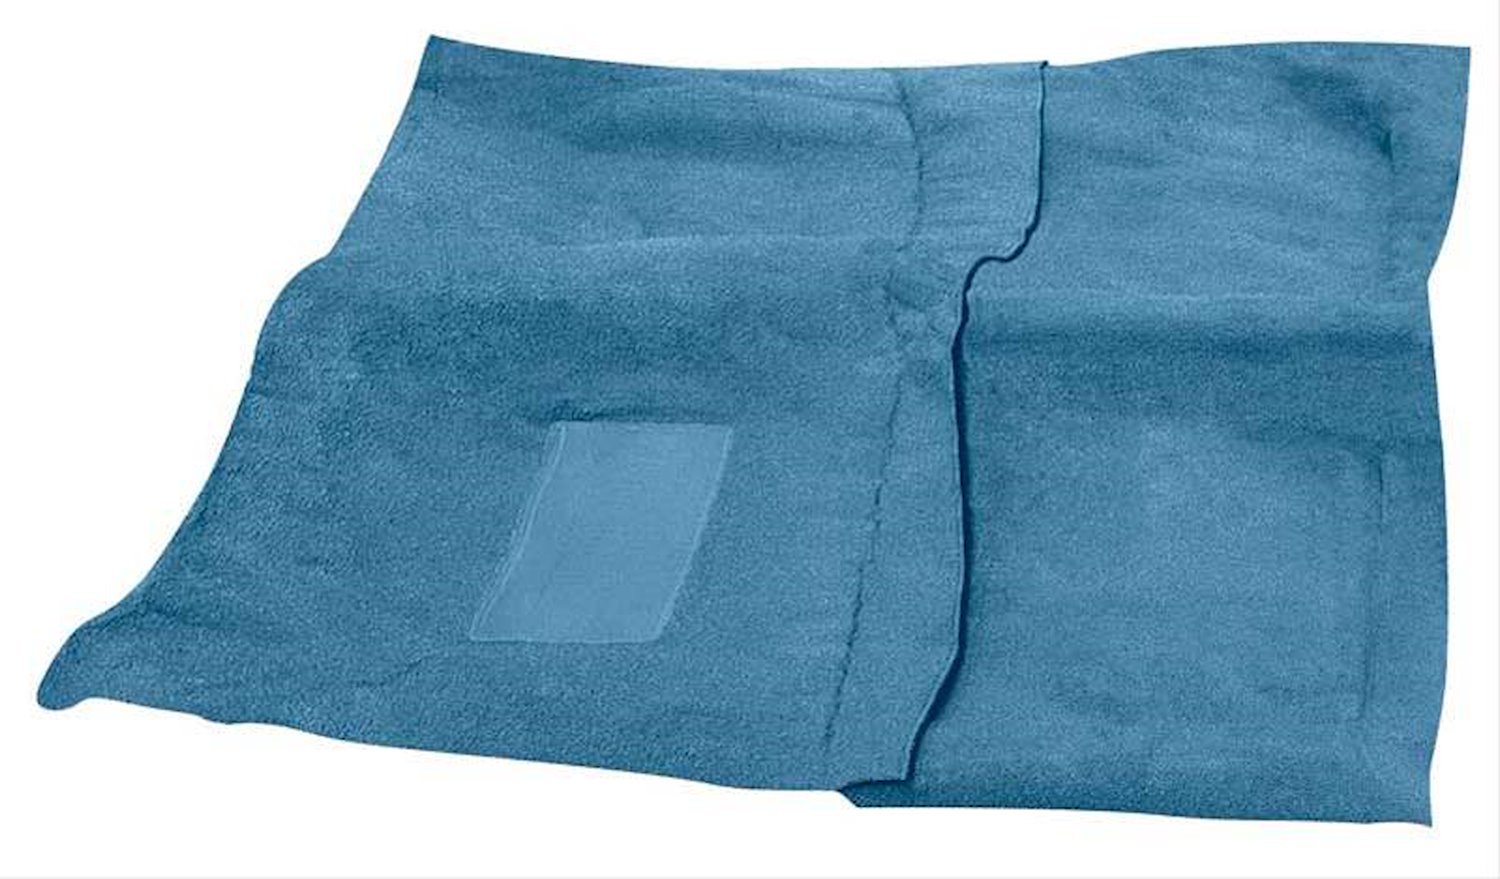 MA531509 Loop Carpet With Tails 1967-69 Dodge Dart Convertible With Auto Trans Medium Blue